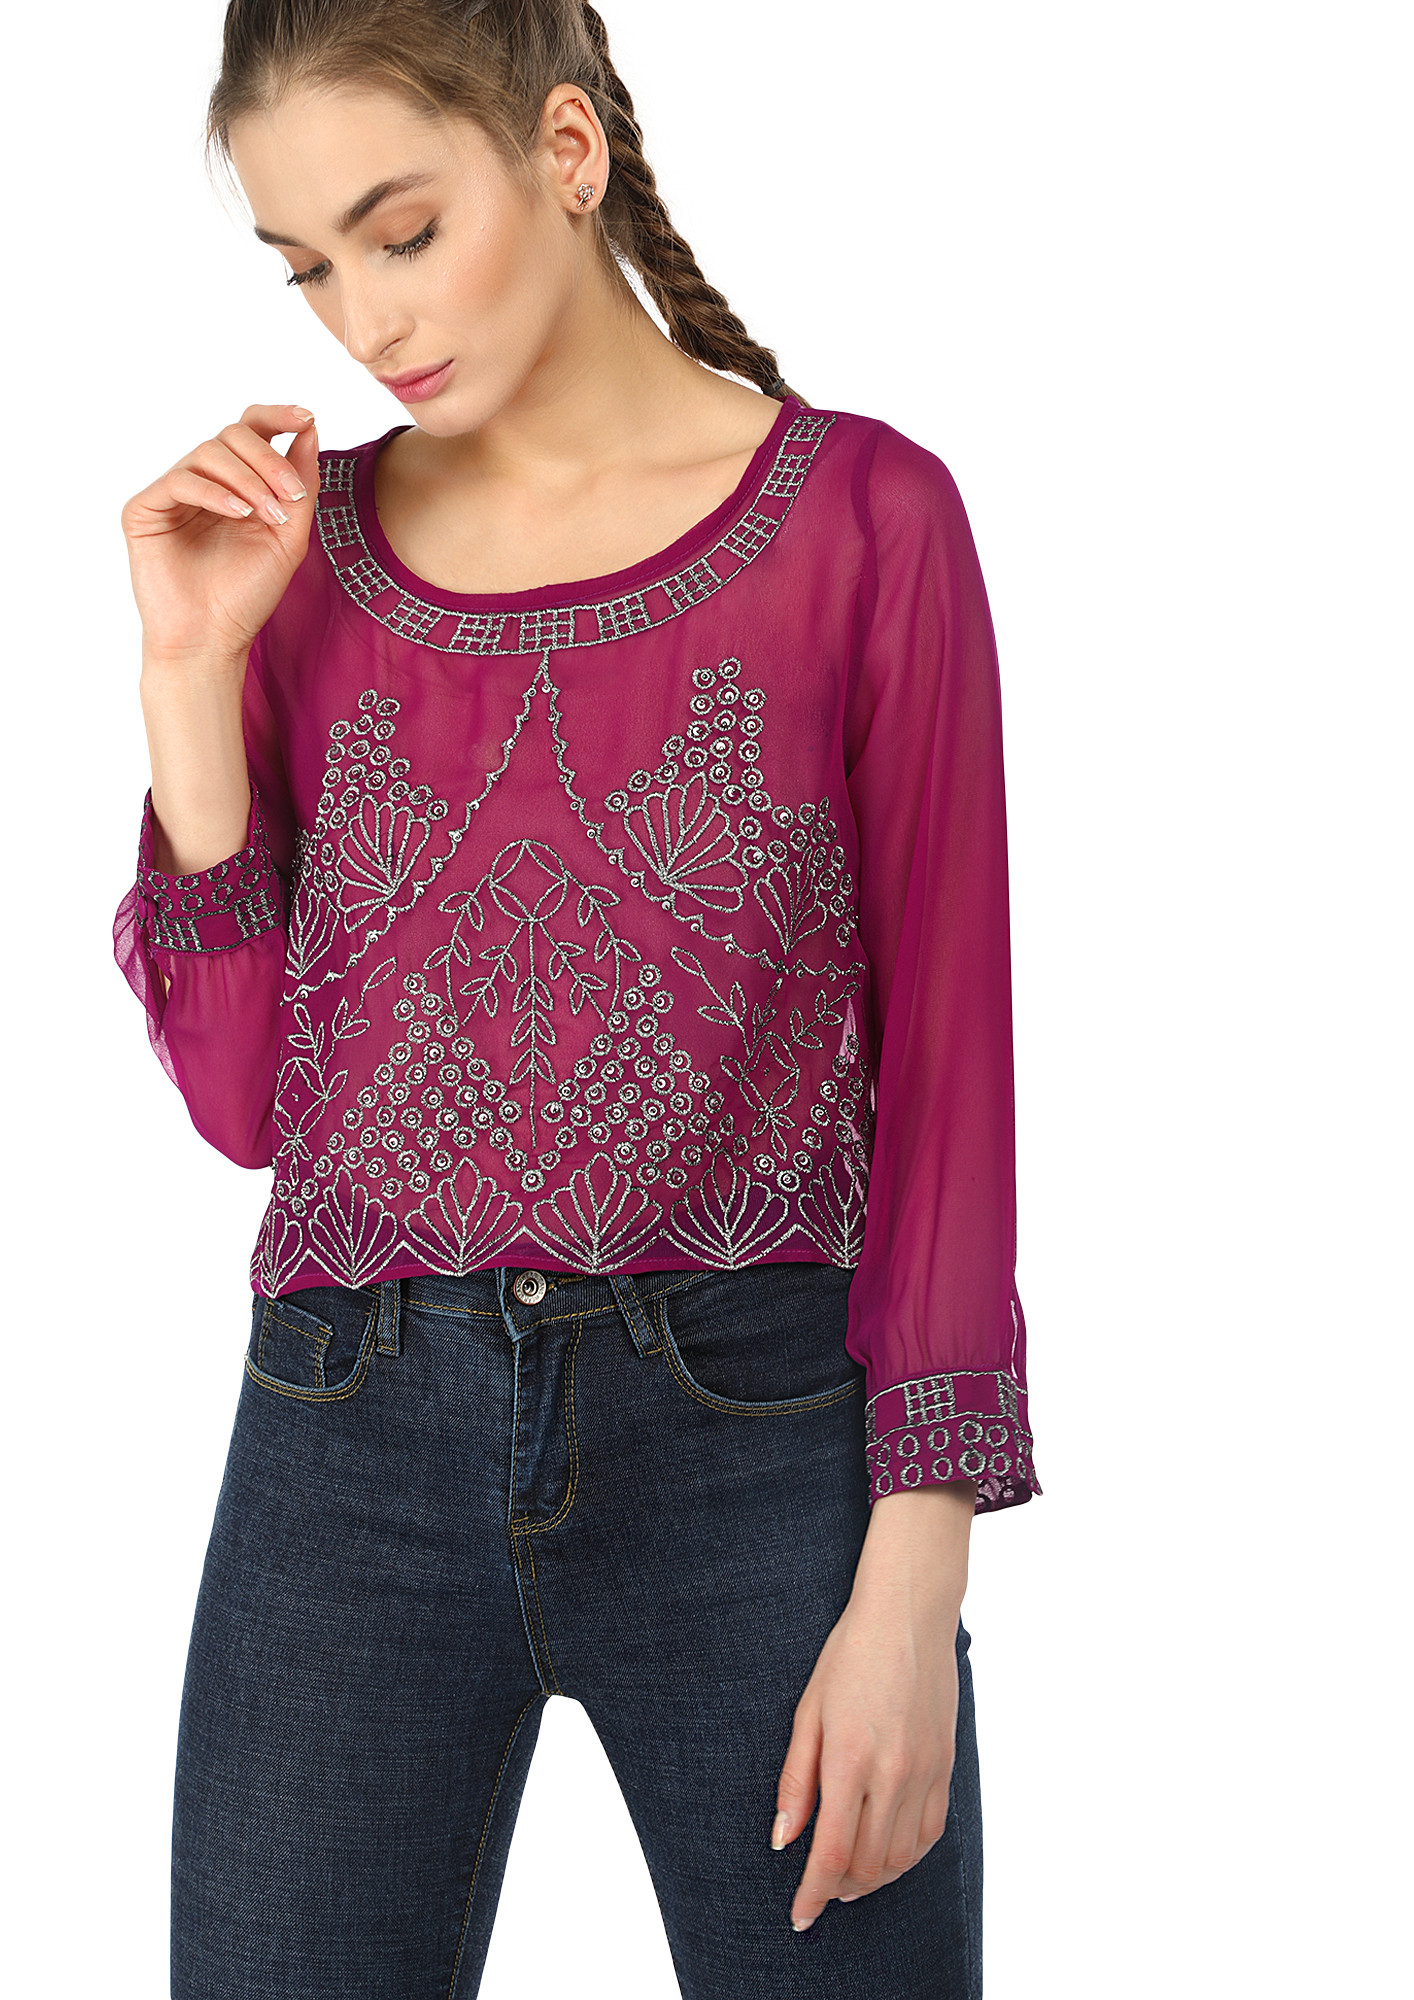 SHEER BY NATURE EMBELLISHED PURPLE BLOUSE